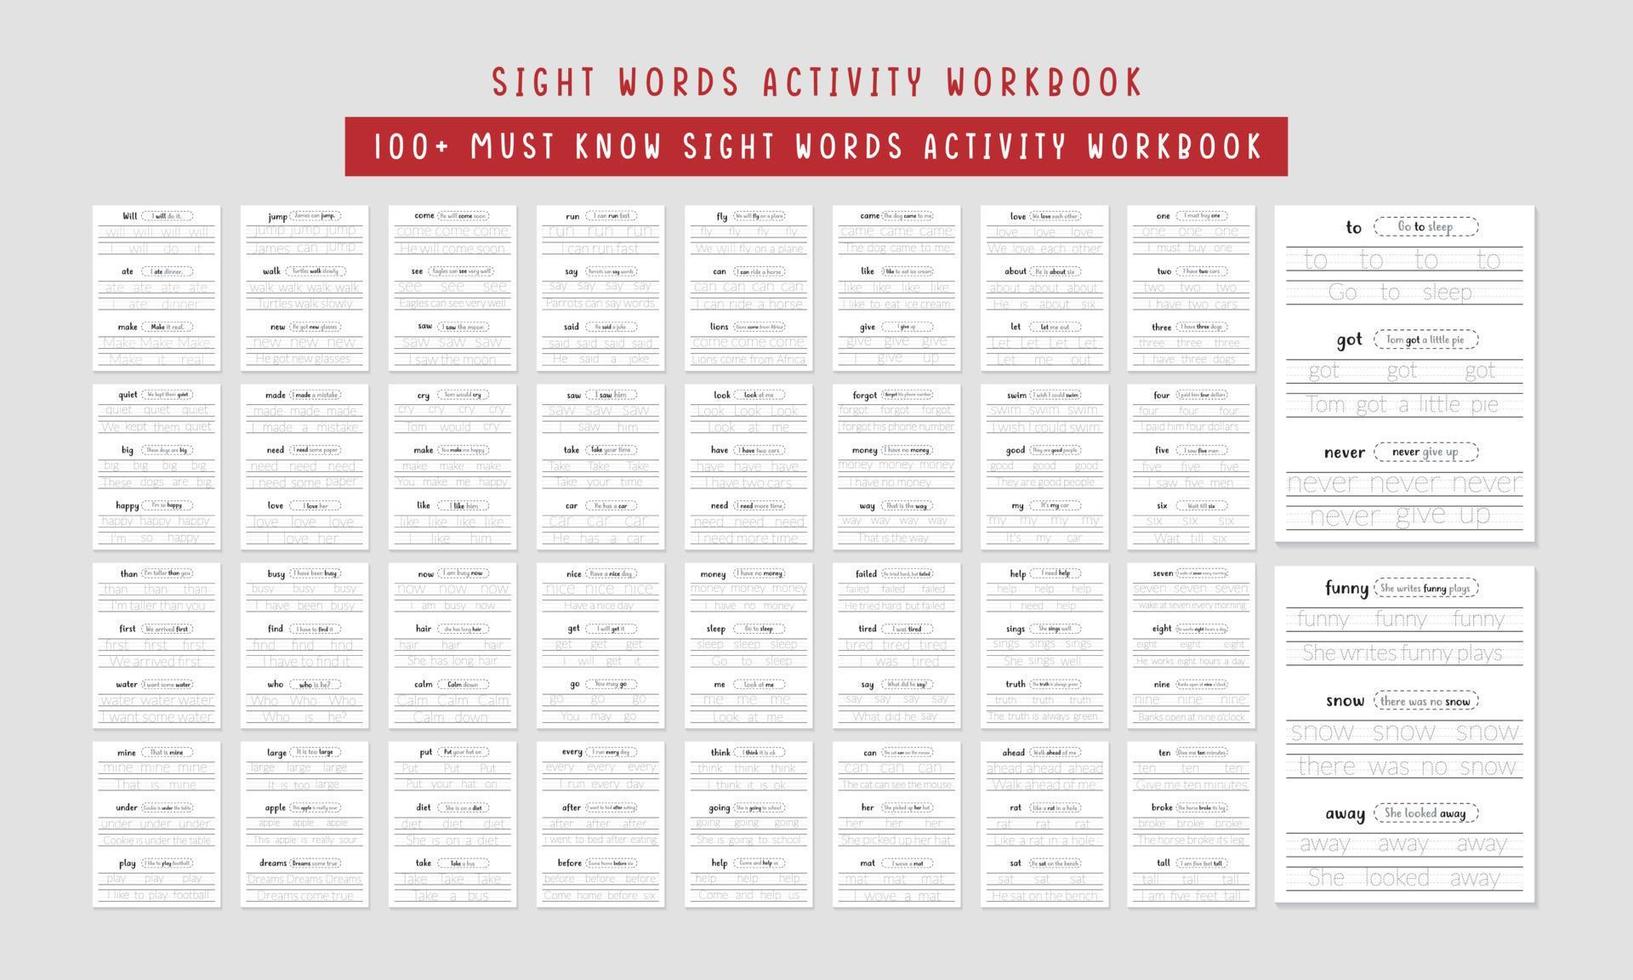 00 Must Know Sight Words Activity Workbook vector